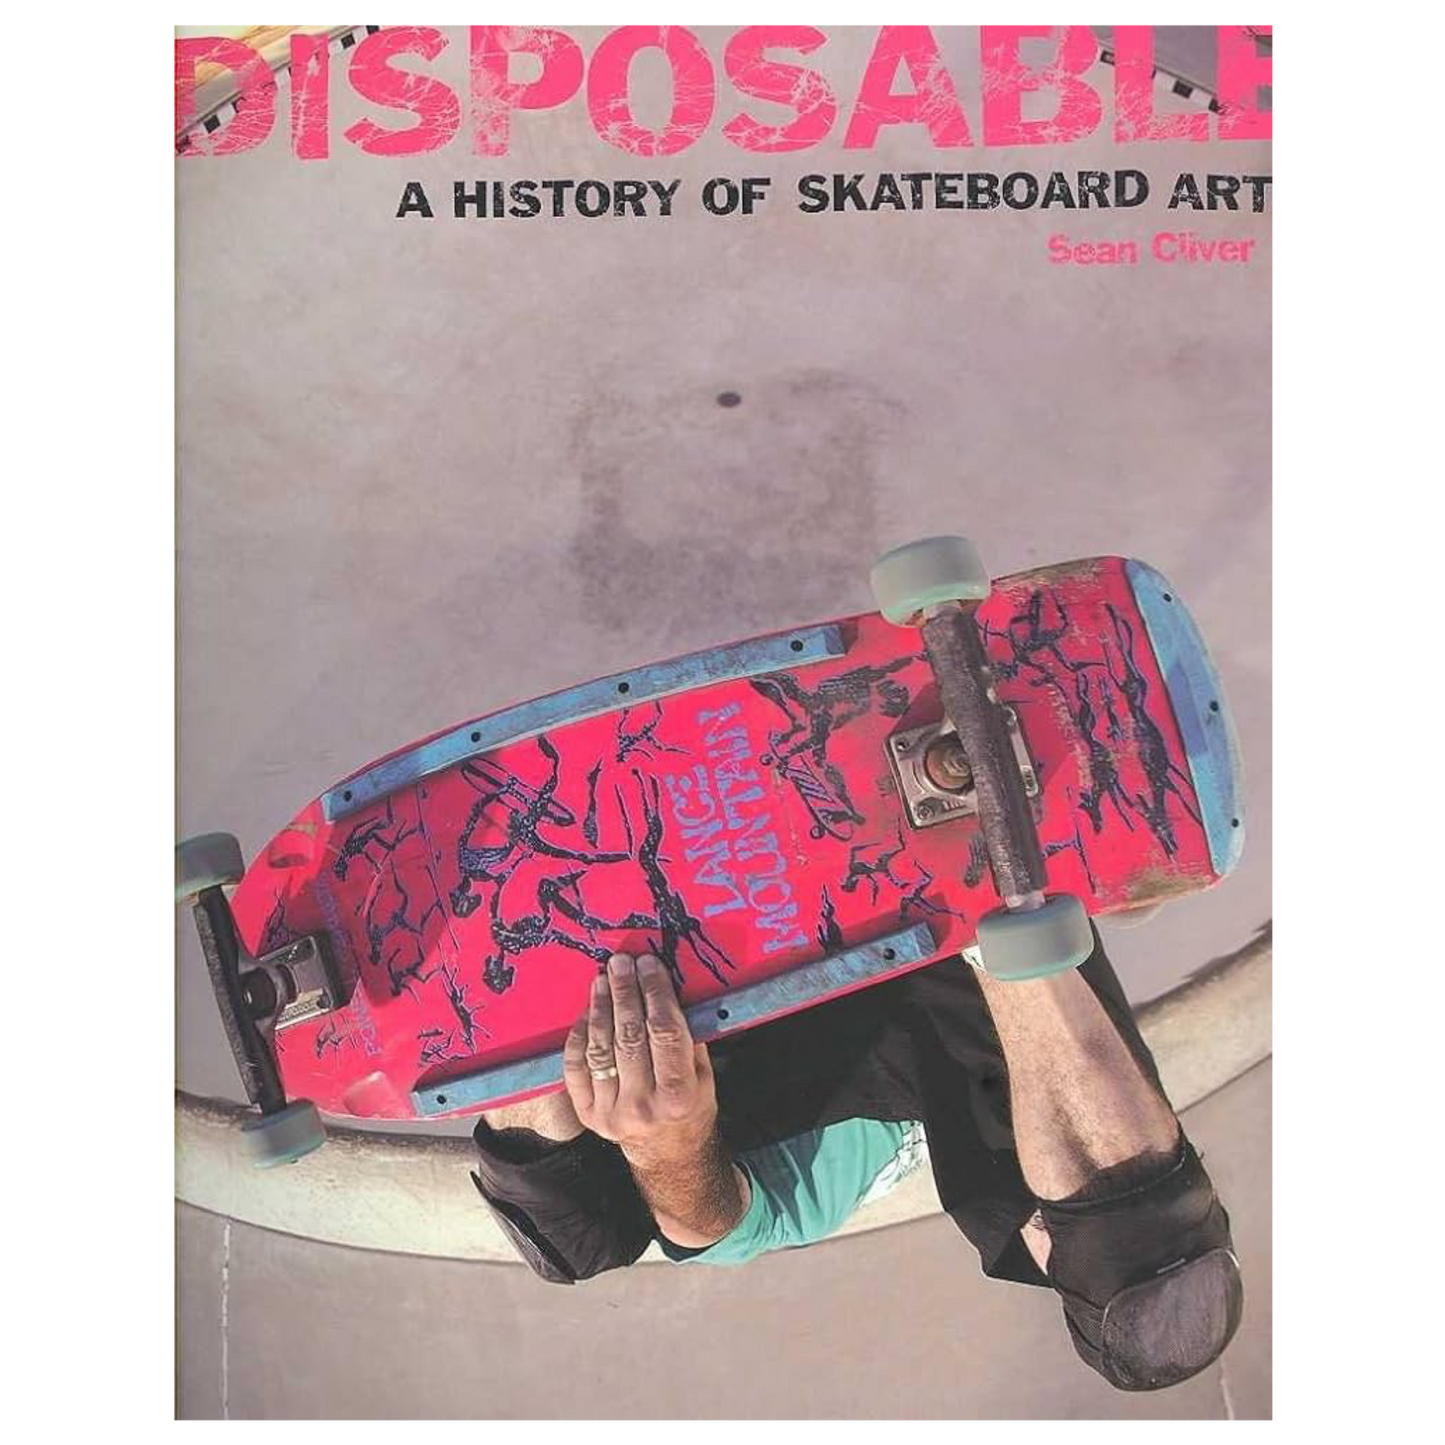 Disposable: A History of Skateboard Art By Sean Cliver